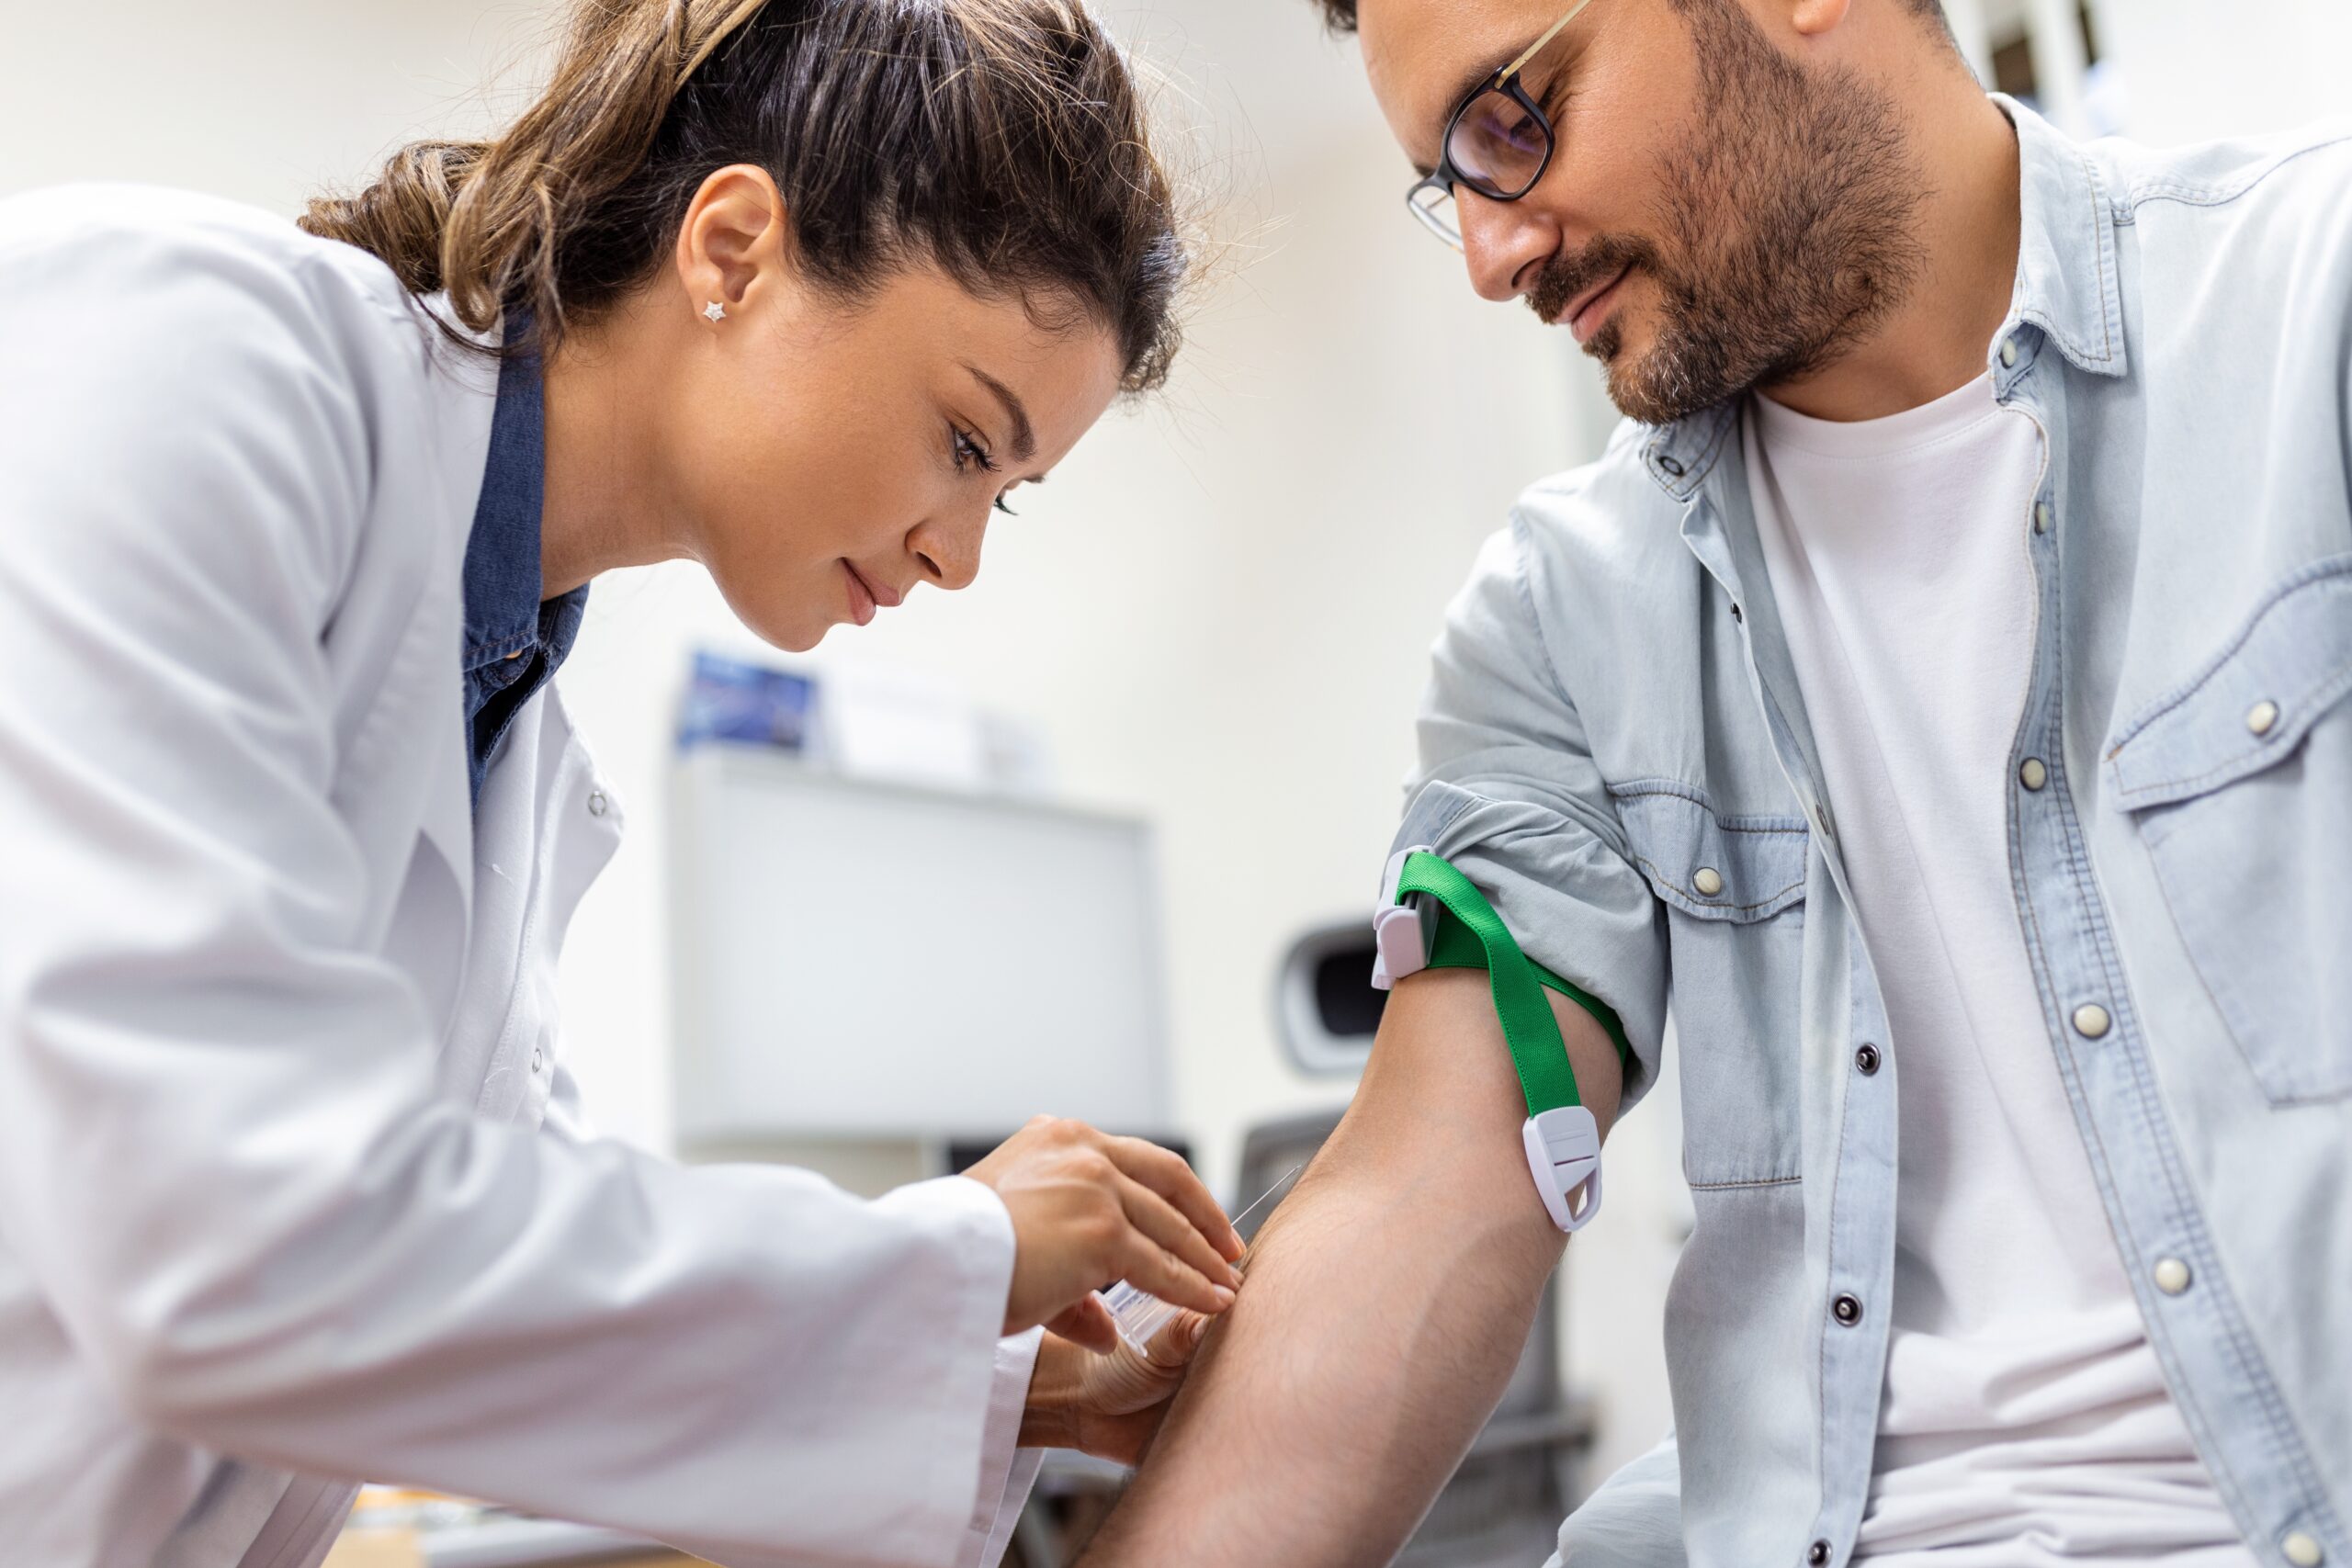 Learn More about Phlebotomist Career Training at Central Coast College!